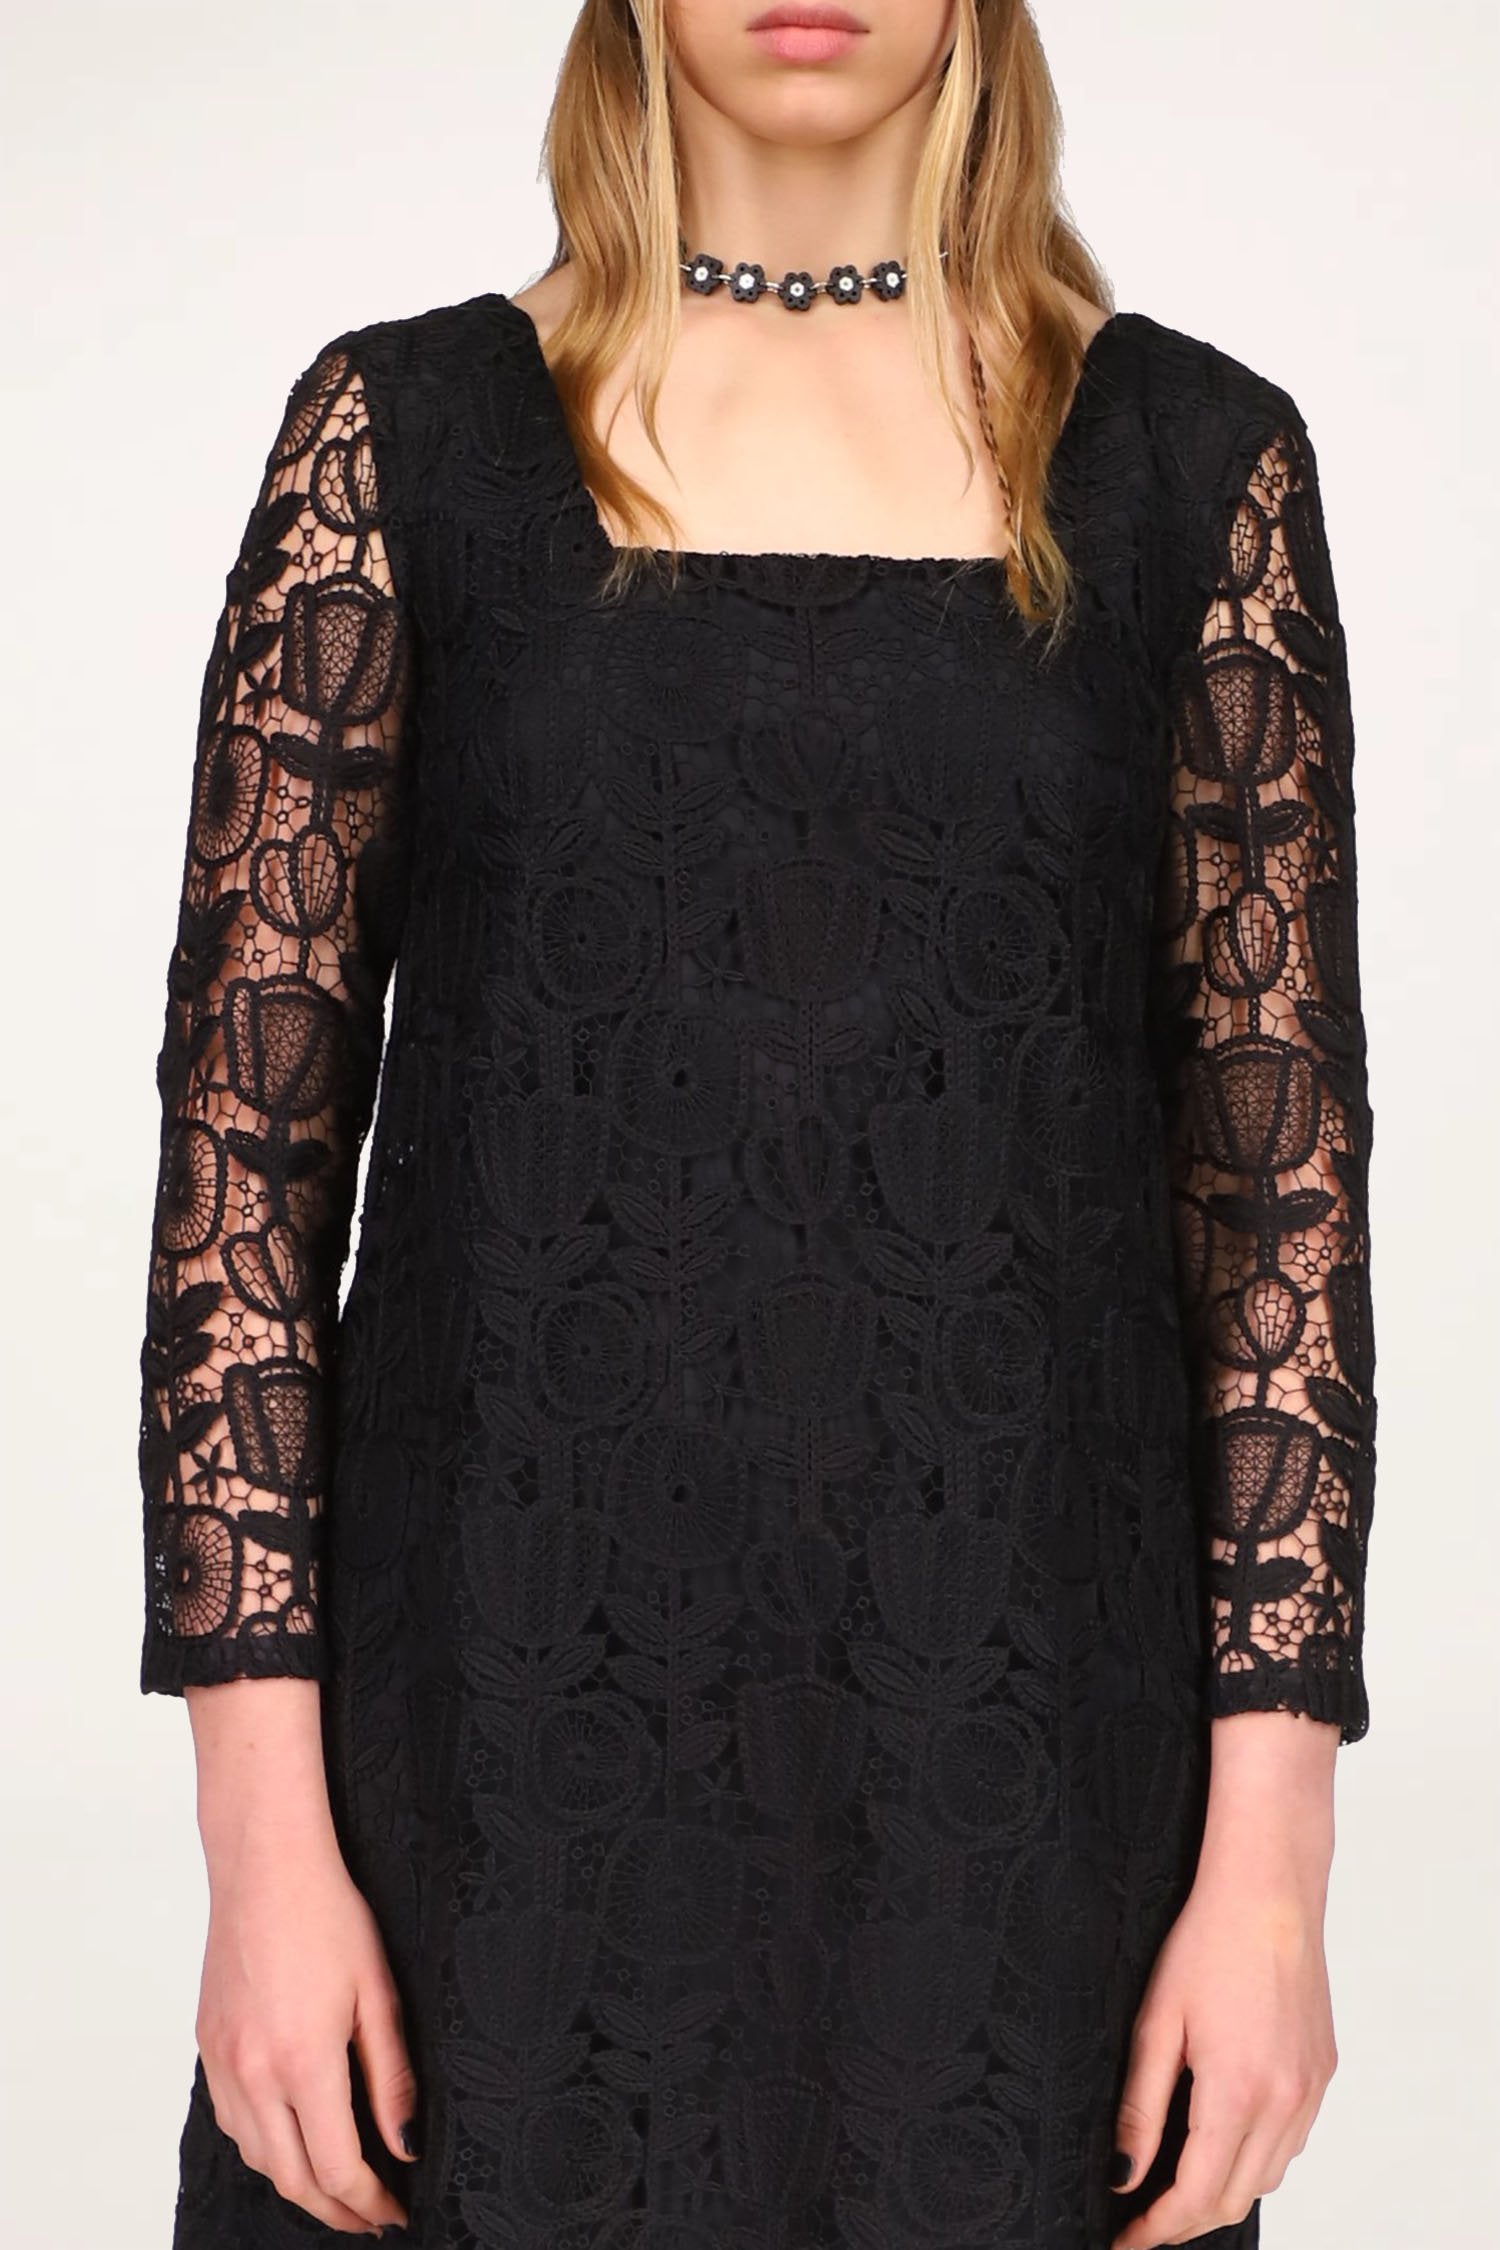 Garden Lace Madonna Dress, detail of the lace floral design, sleeves stop just above the wrist